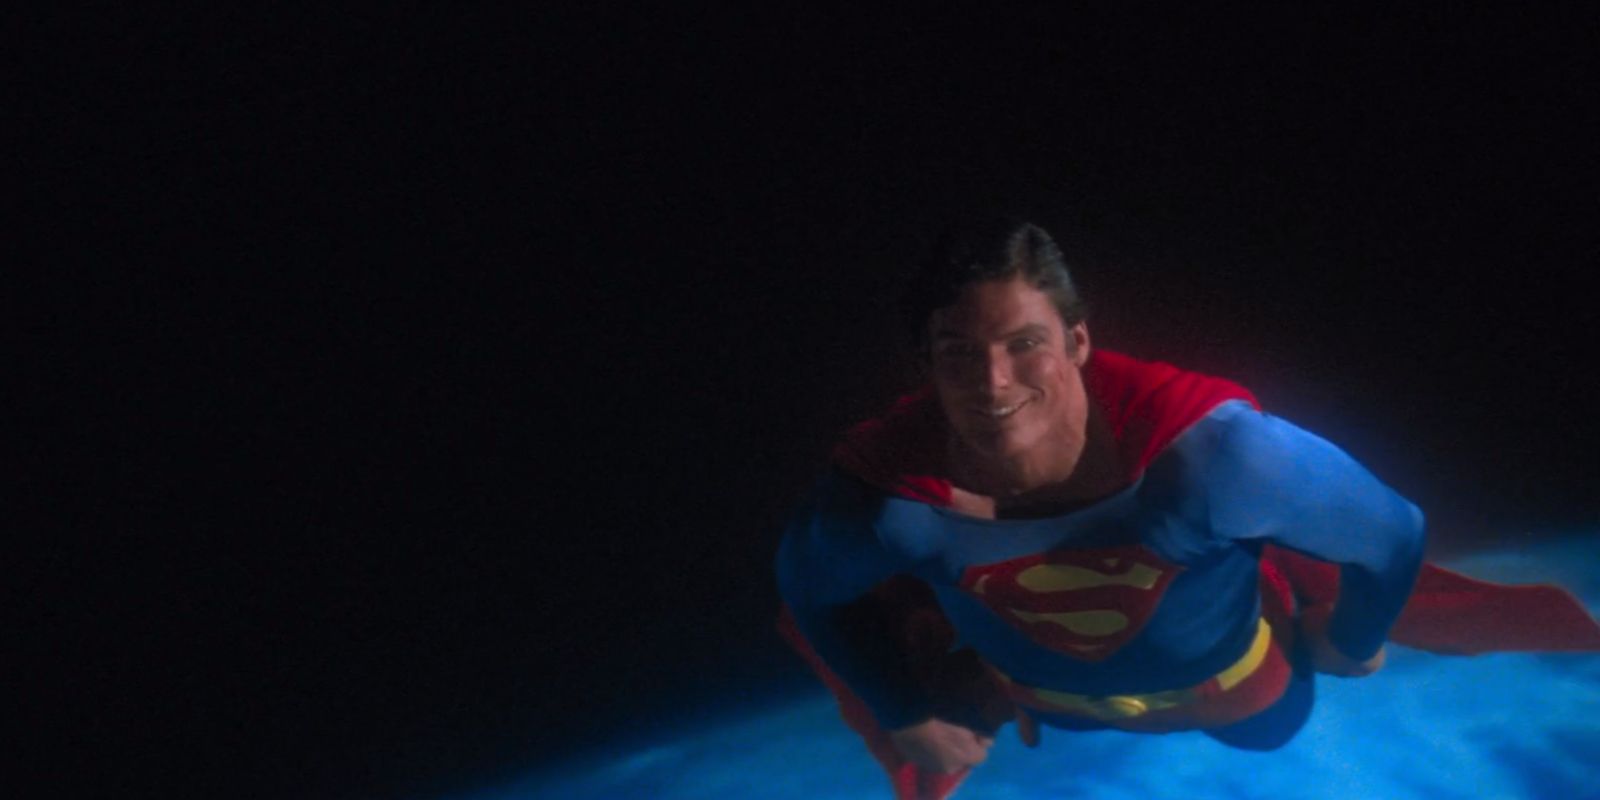 Christopher Reeve's Superman flying in the 1978 movie